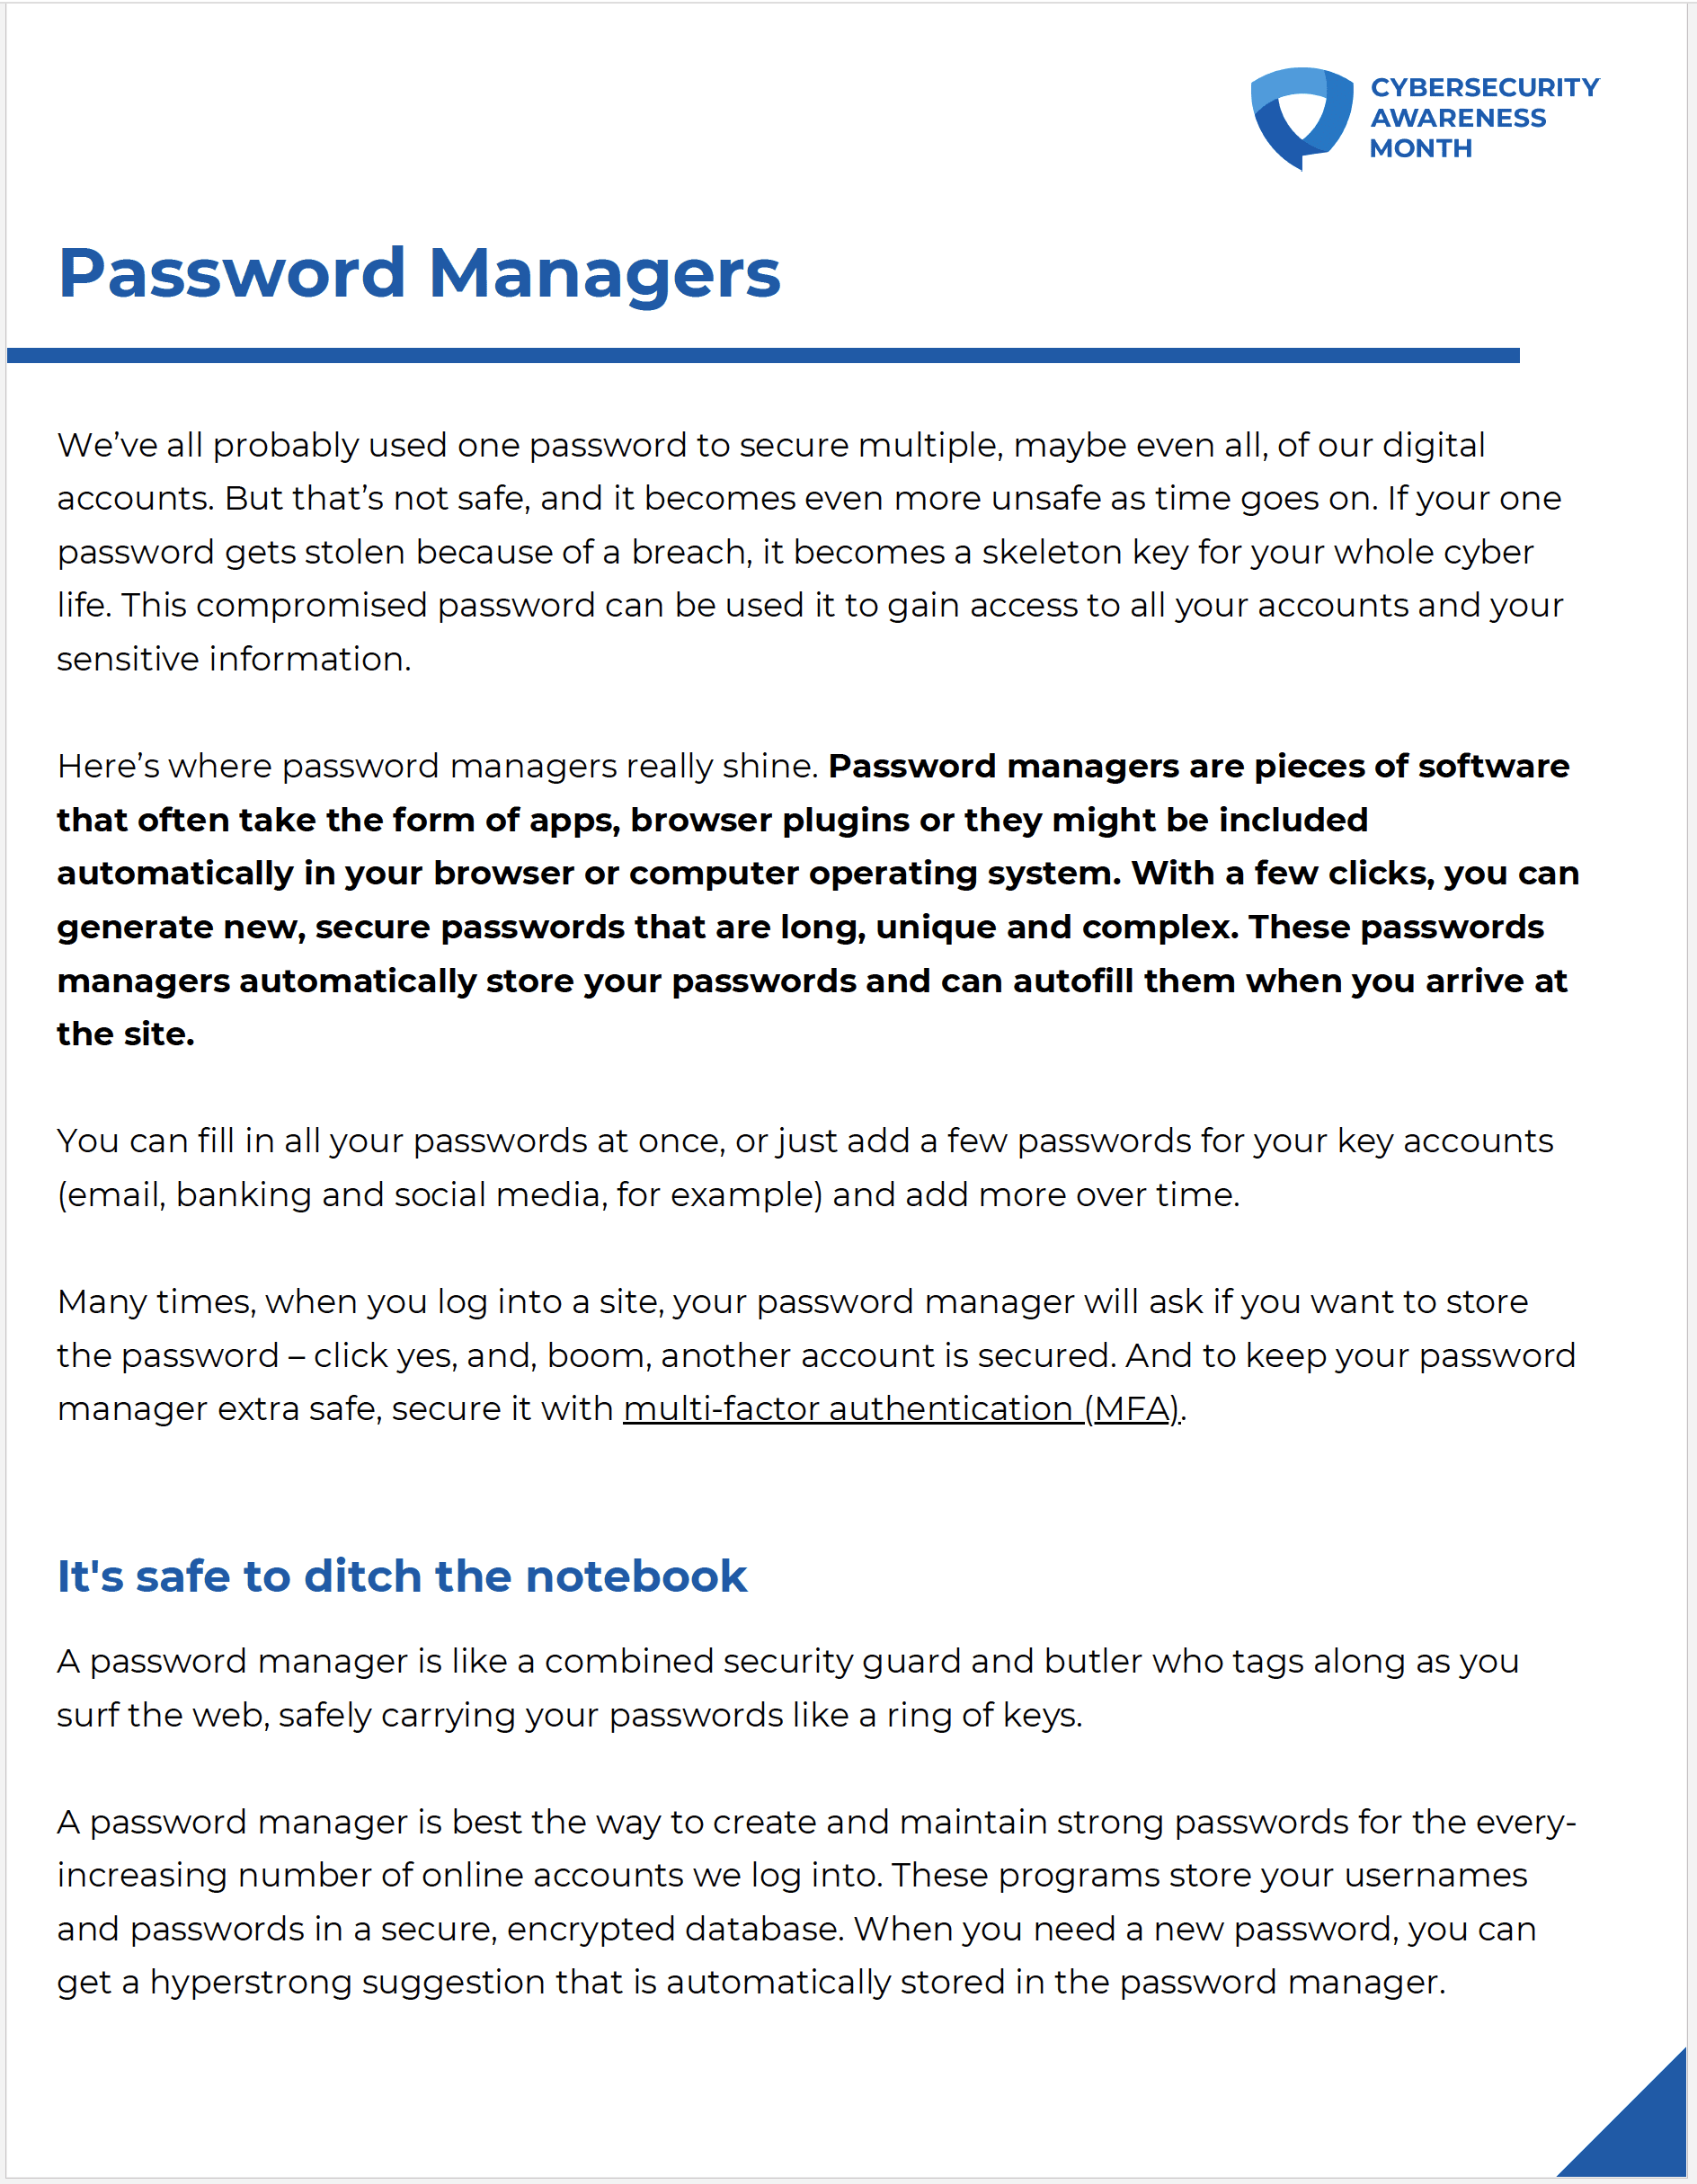 Thumbnail of Password Managers Tip Sheet